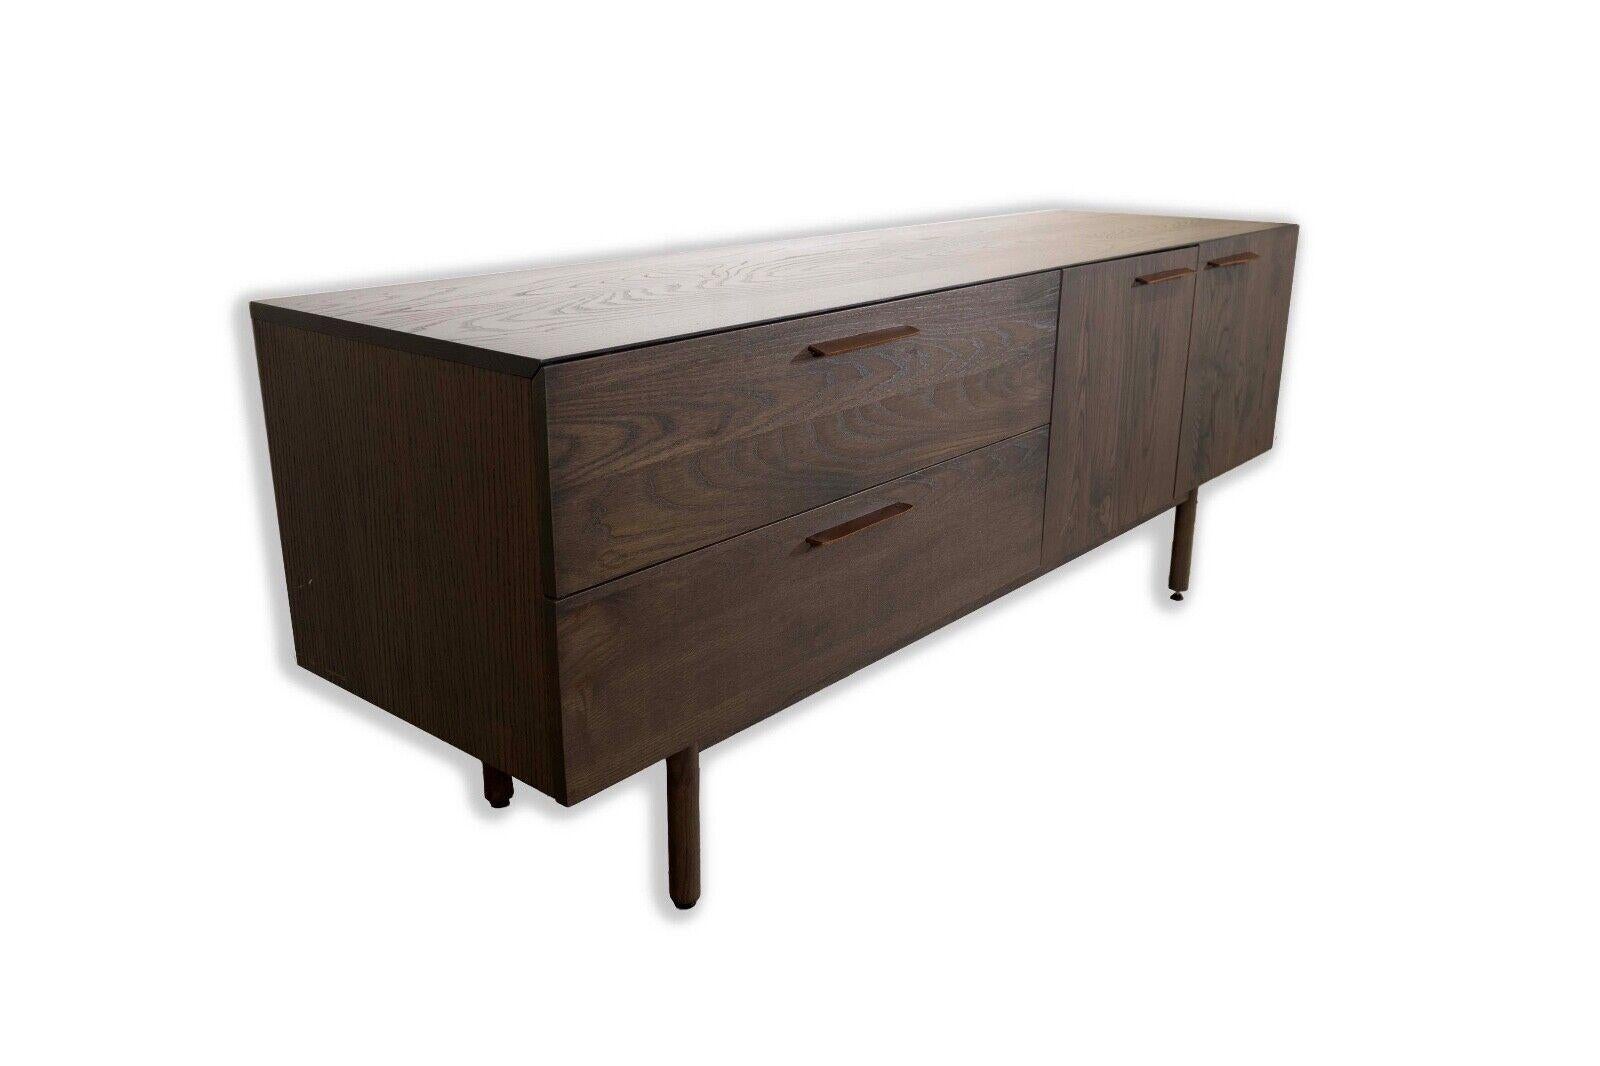 The Blu Dot Shale 2 Drawer 2 Door Console Credenza Sideboard seamlessly blends contemporary aesthetics with modern functionality. Crafted with precision, its sleek design features two spacious drawers and two doors, providing ample storage space for